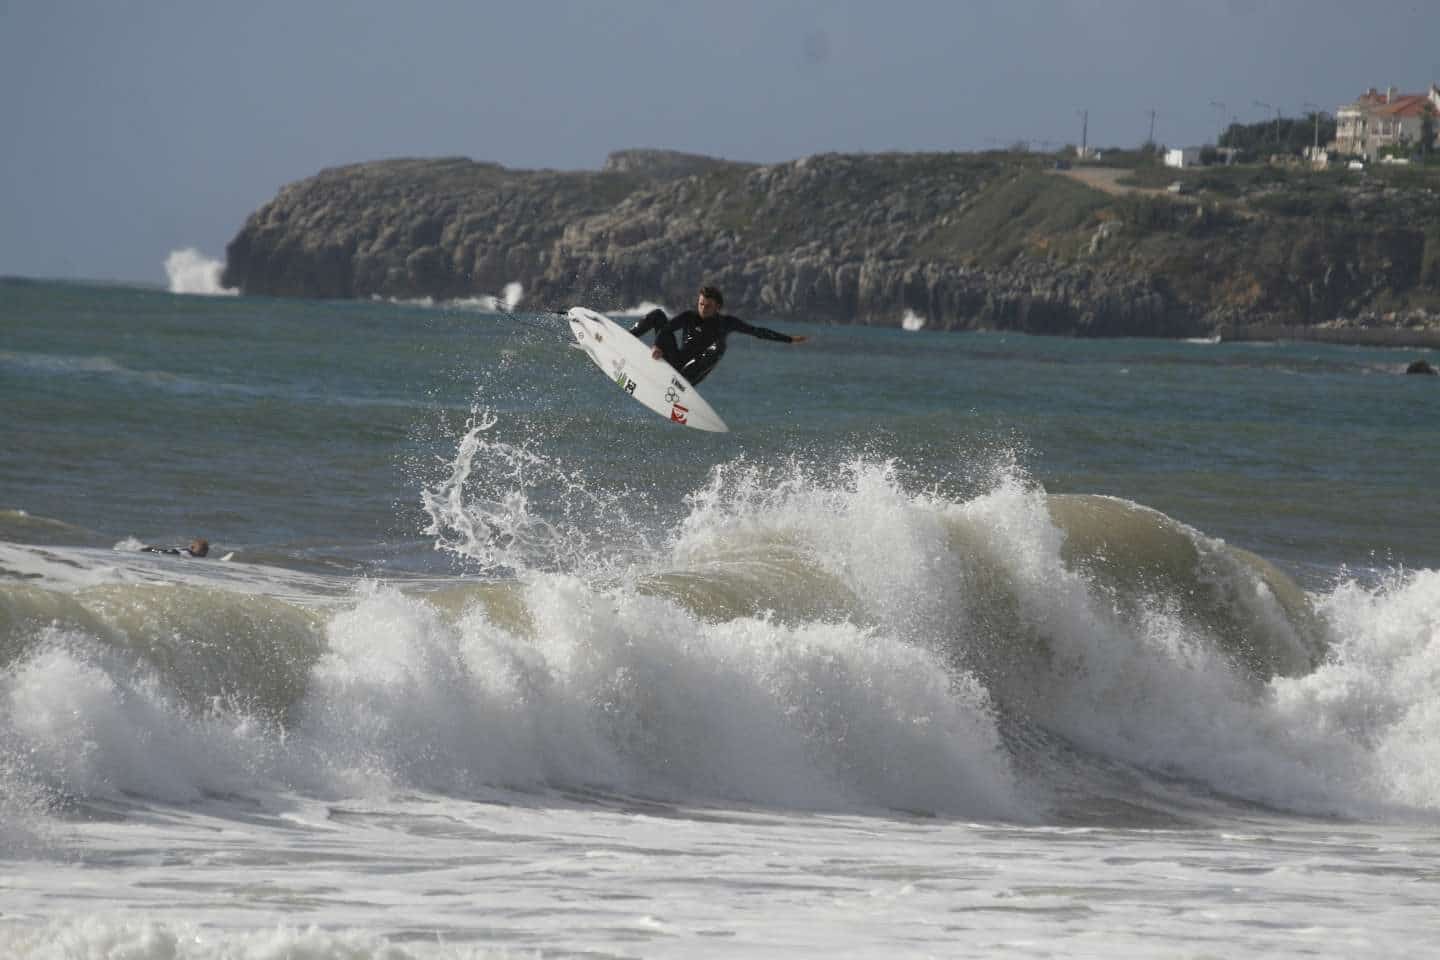 A surfer riding a large wave at a beach in Peniche, Portugal